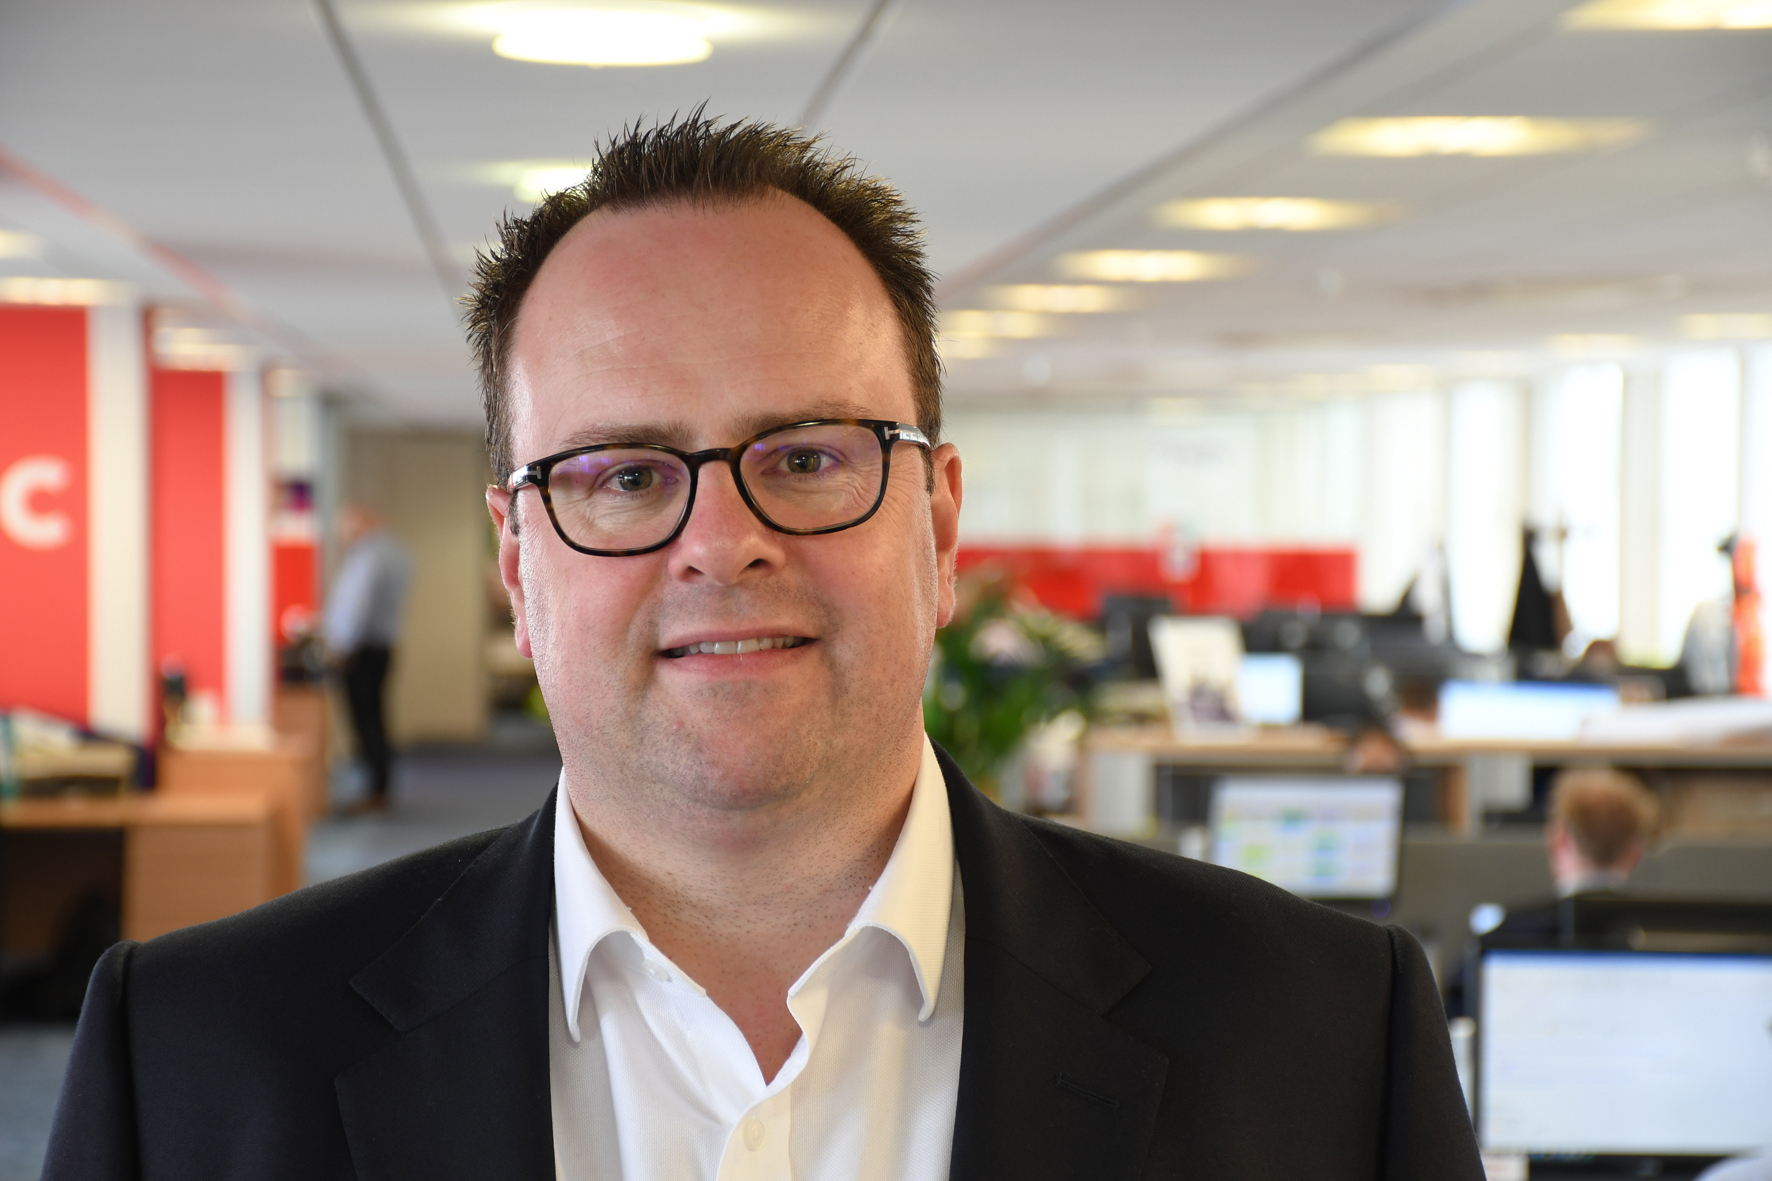 Robert Franks has been appointed as managing director of West Midlands 5G Limited (WM5G)